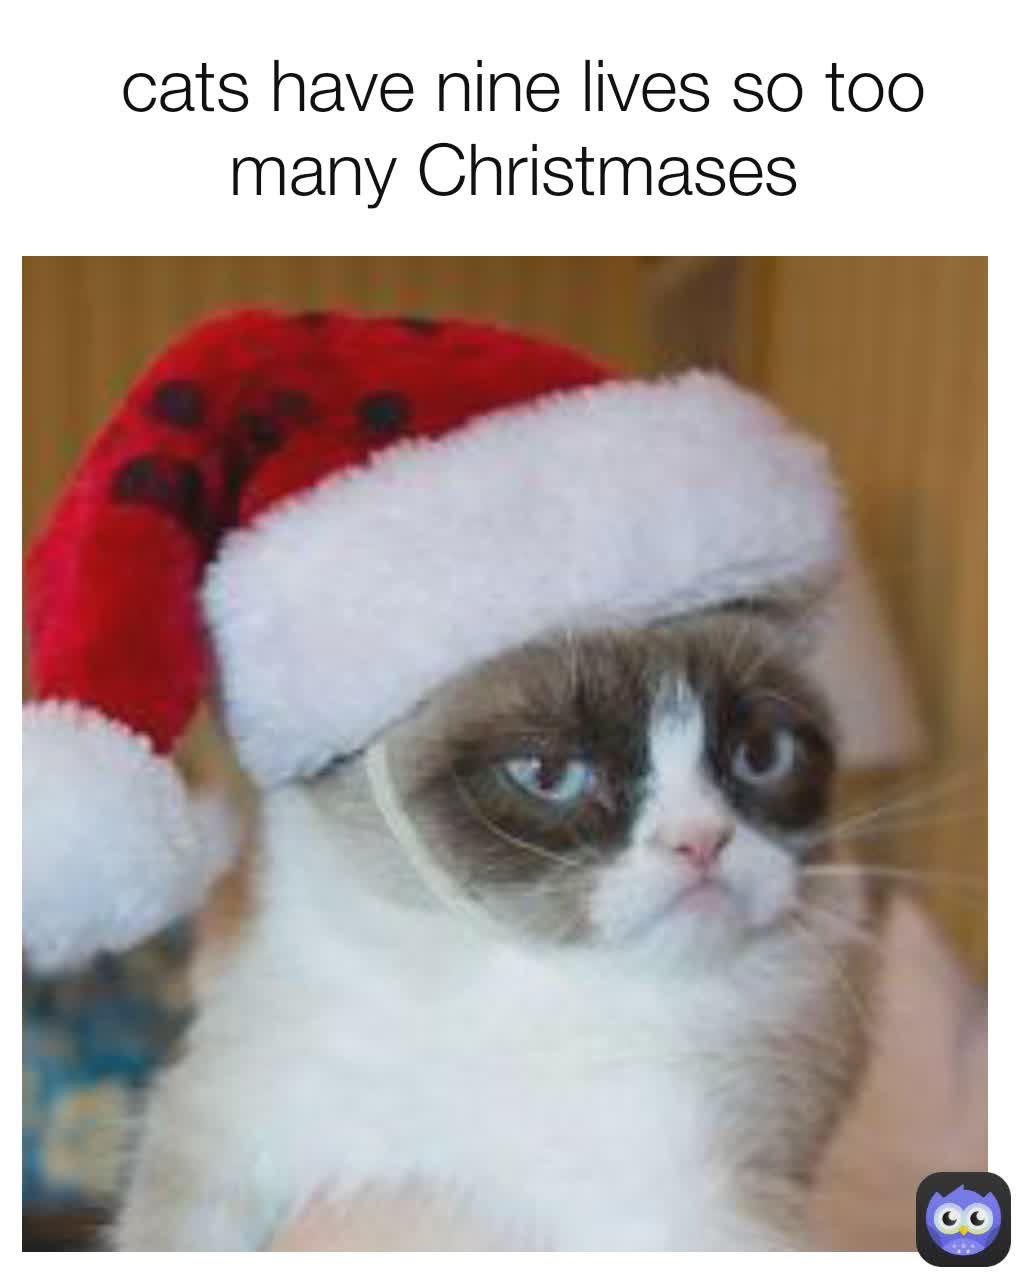  cats have nine lives so too many Christmases